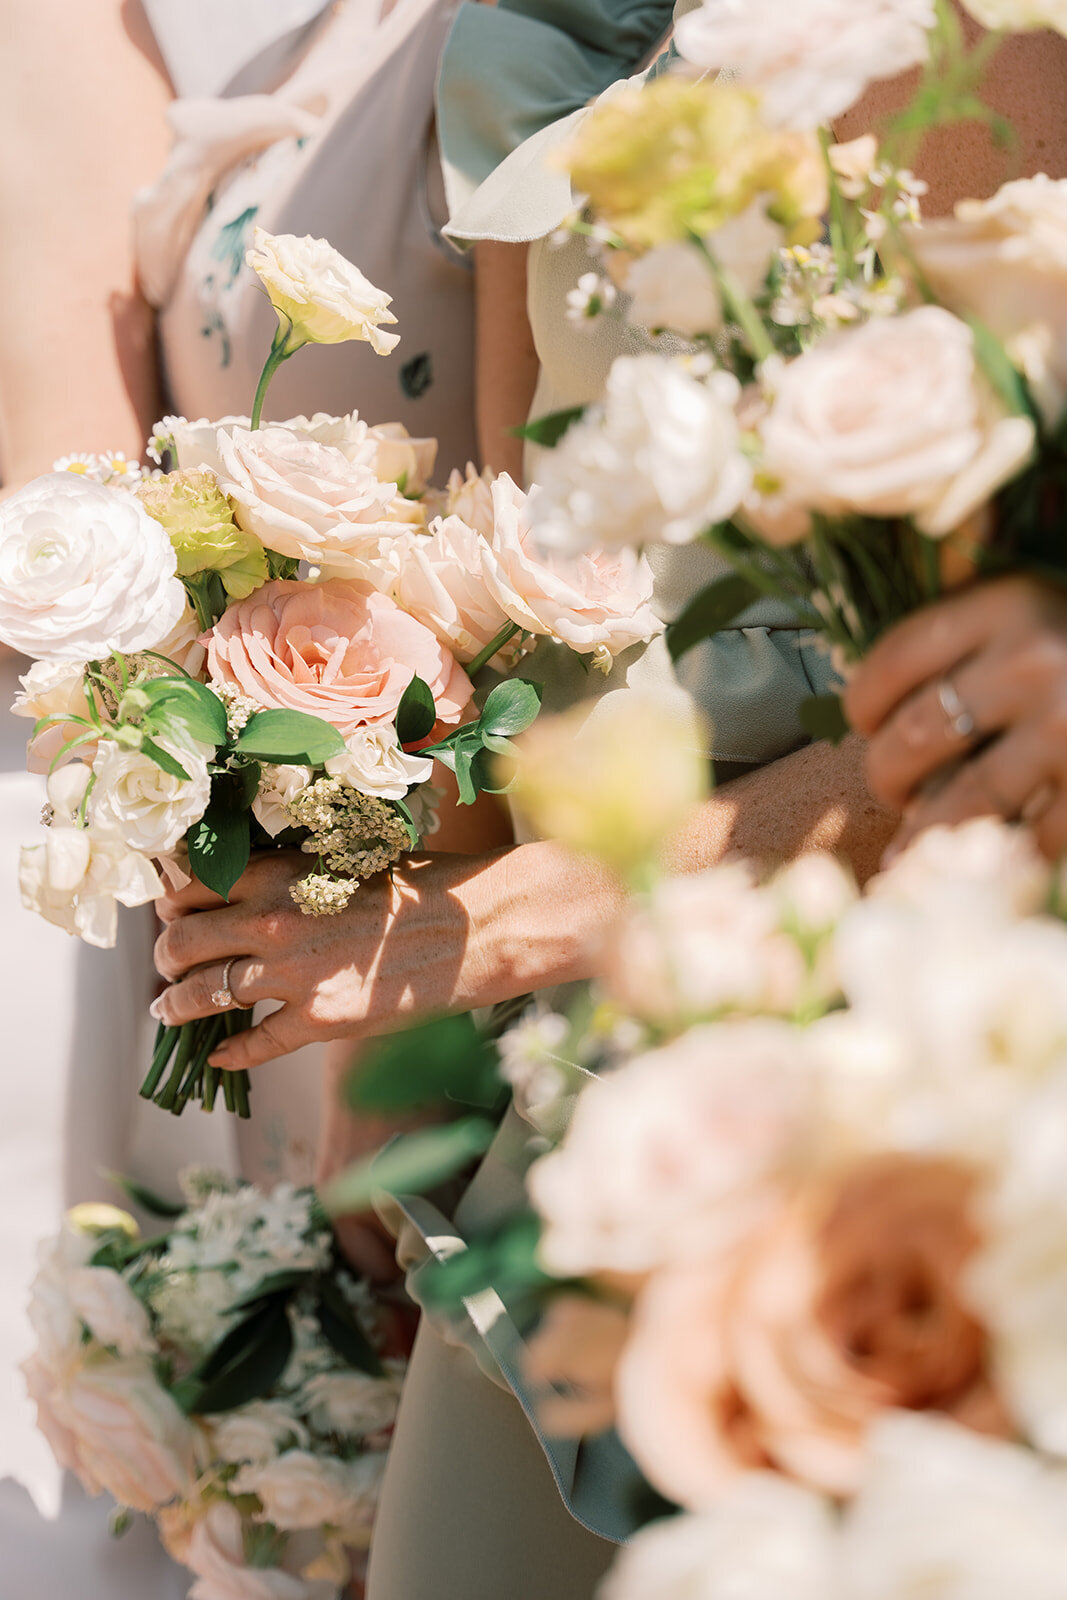 Bridesmaid’s bouquets with peach and blush garden roses, ranunculus and lisianthus.